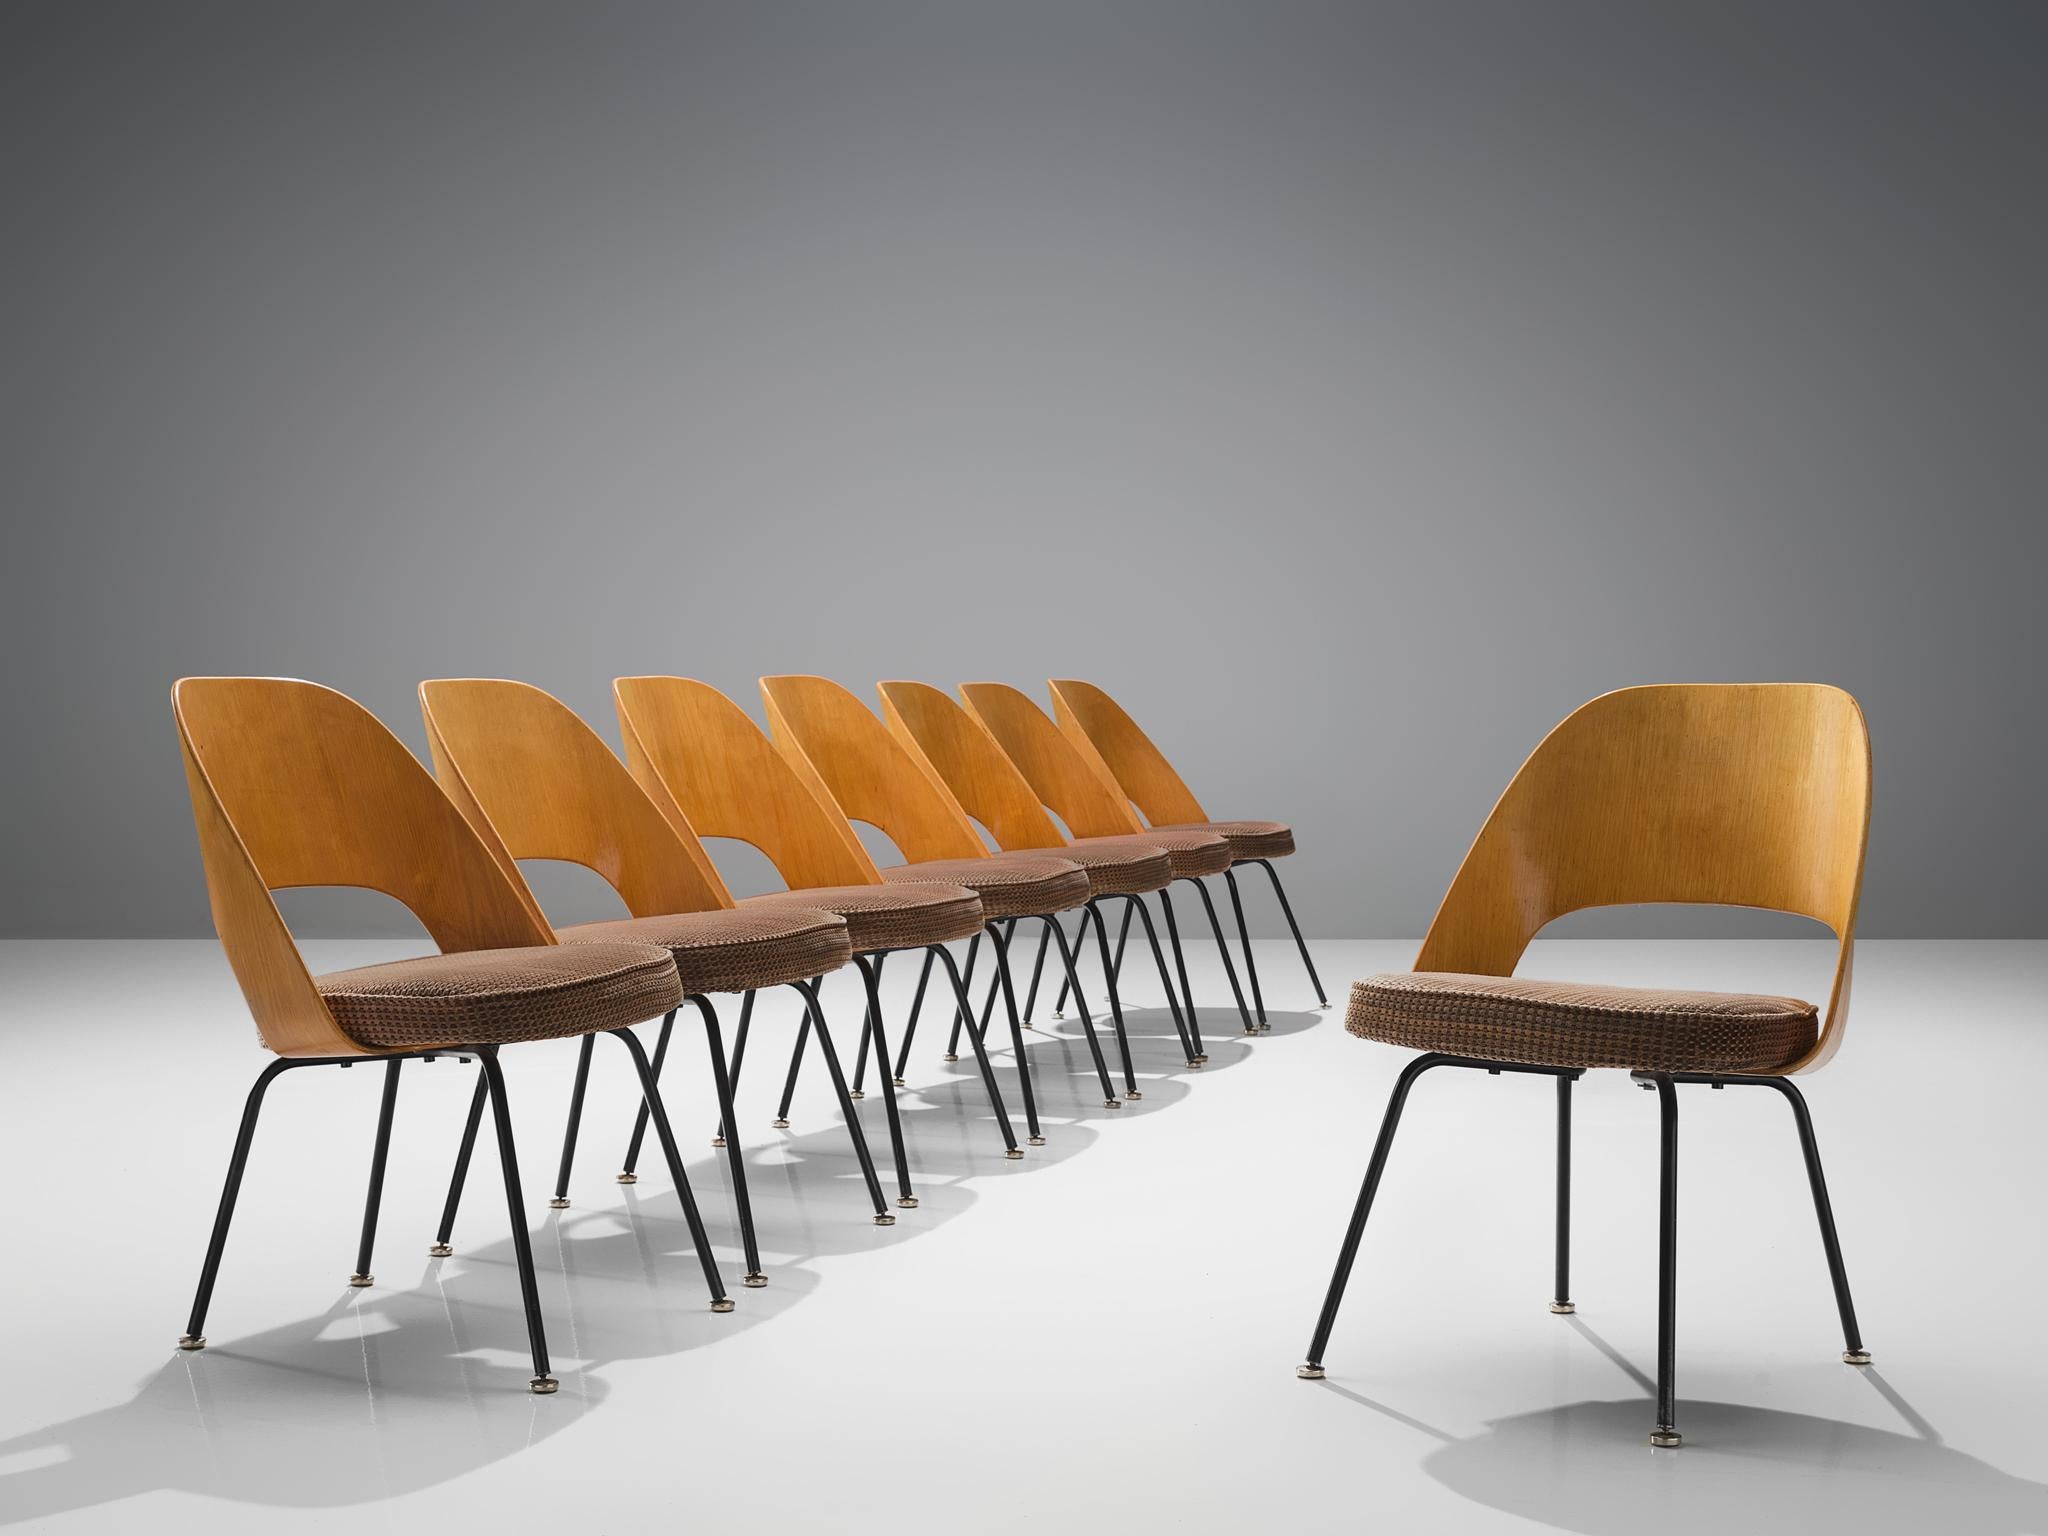 Eero Saarinen for Knoll International, set of 8 chairs model 72, in metal, wood fabric, United States, 1955. 

Eight organic shaped chairs designed by Eero Saarinen. This iconic model is features a plywood back and a seat with original brown, beige